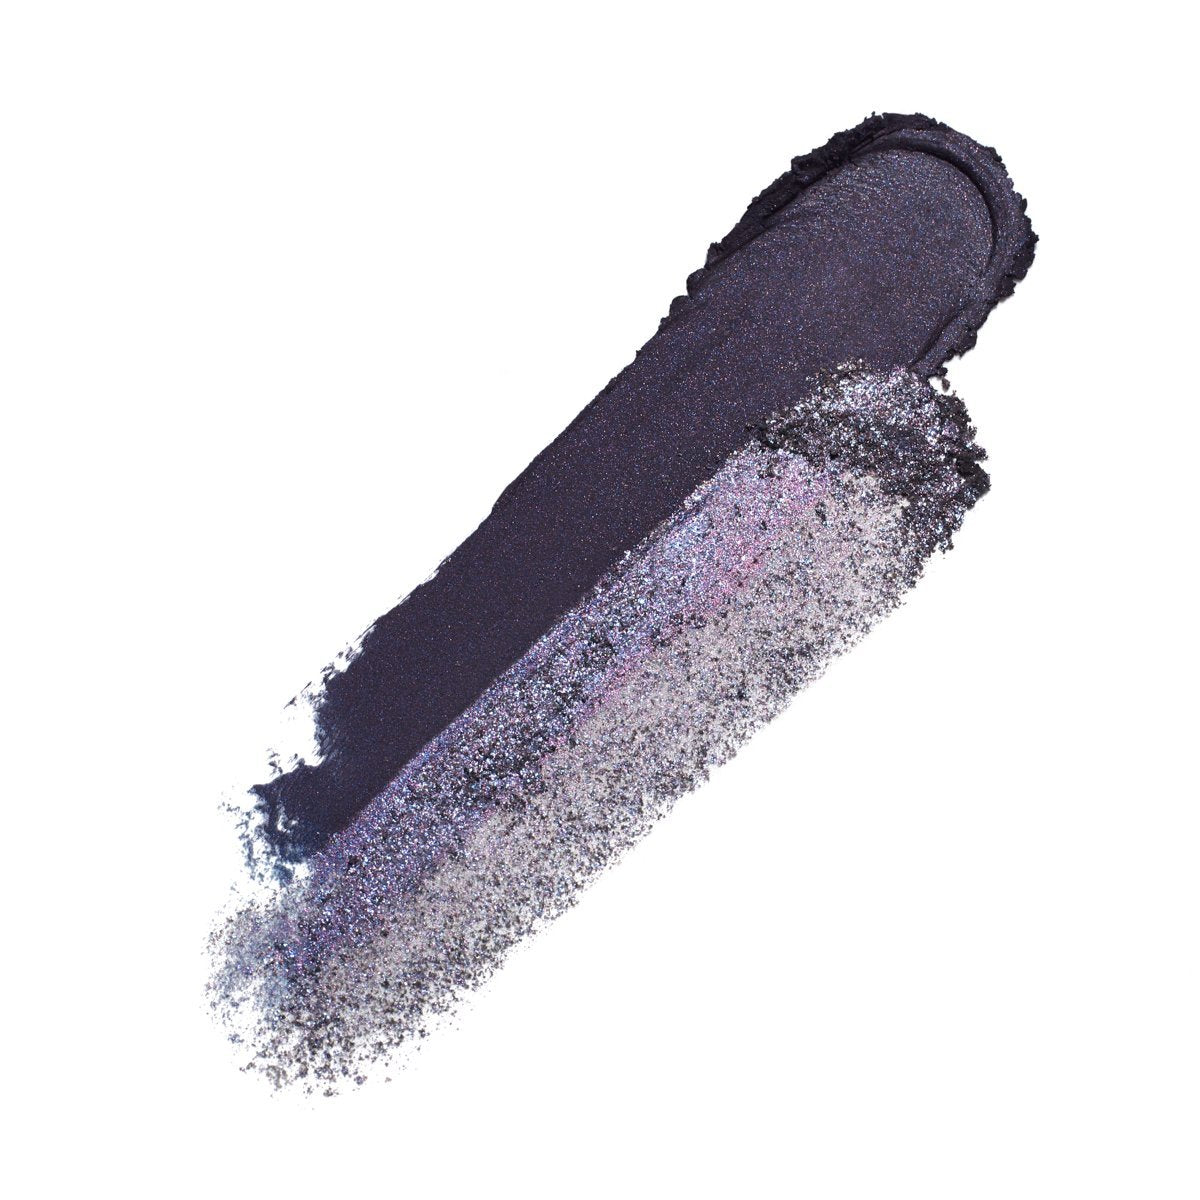 VISUAL EYES - INKY BLUE CREAM WITH STEEL-BLUE SHADOW - Inky blue cream with steel-blue shimmer powder in unique double-decker eyeshadow